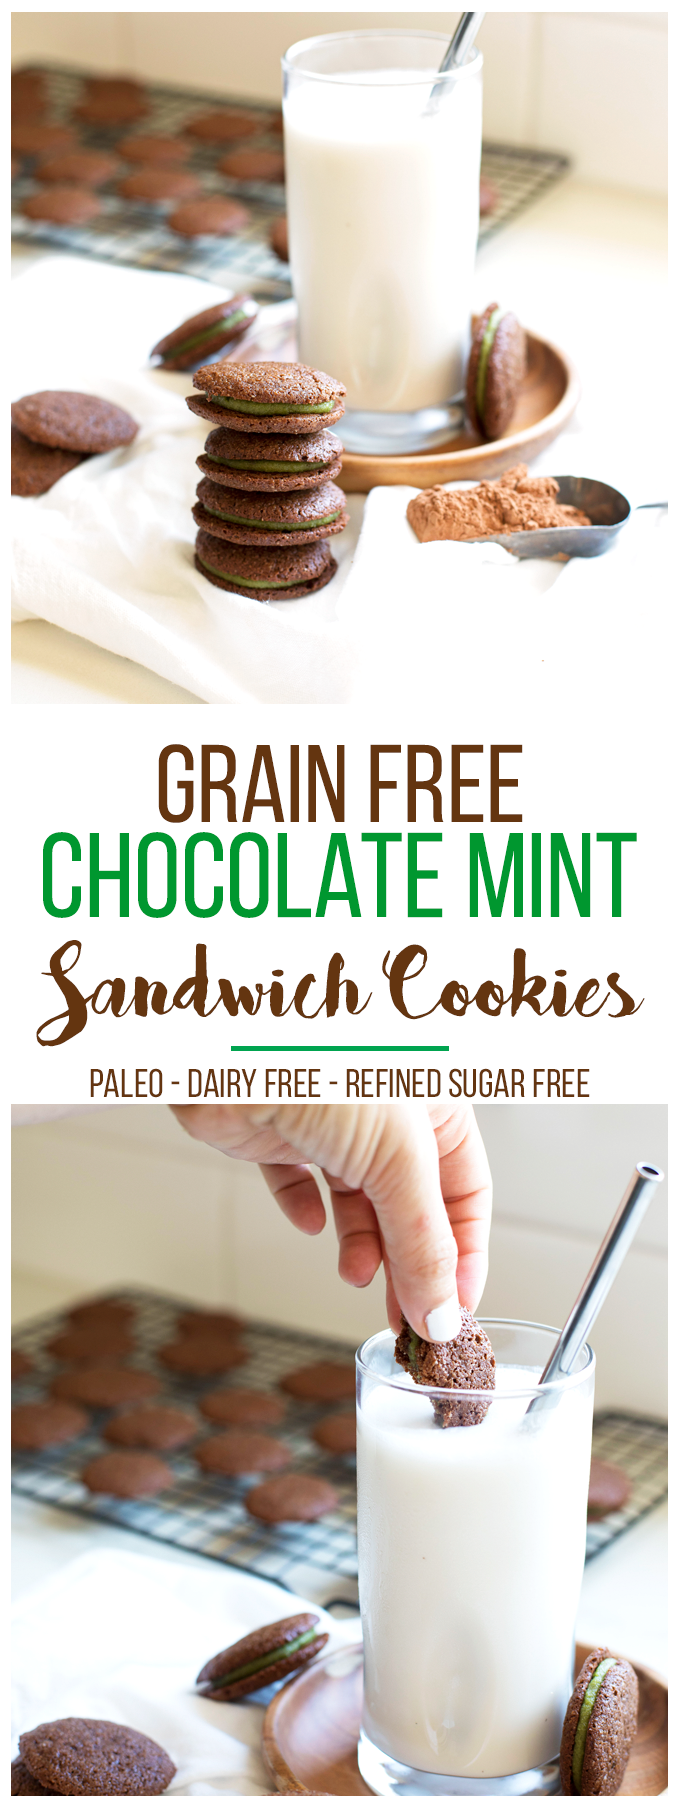 These Grain Free Chocolate Mint Sandwich Cookies are the perfect paleo treat - great for any time of the year! Dairy free and refined sugar free too!